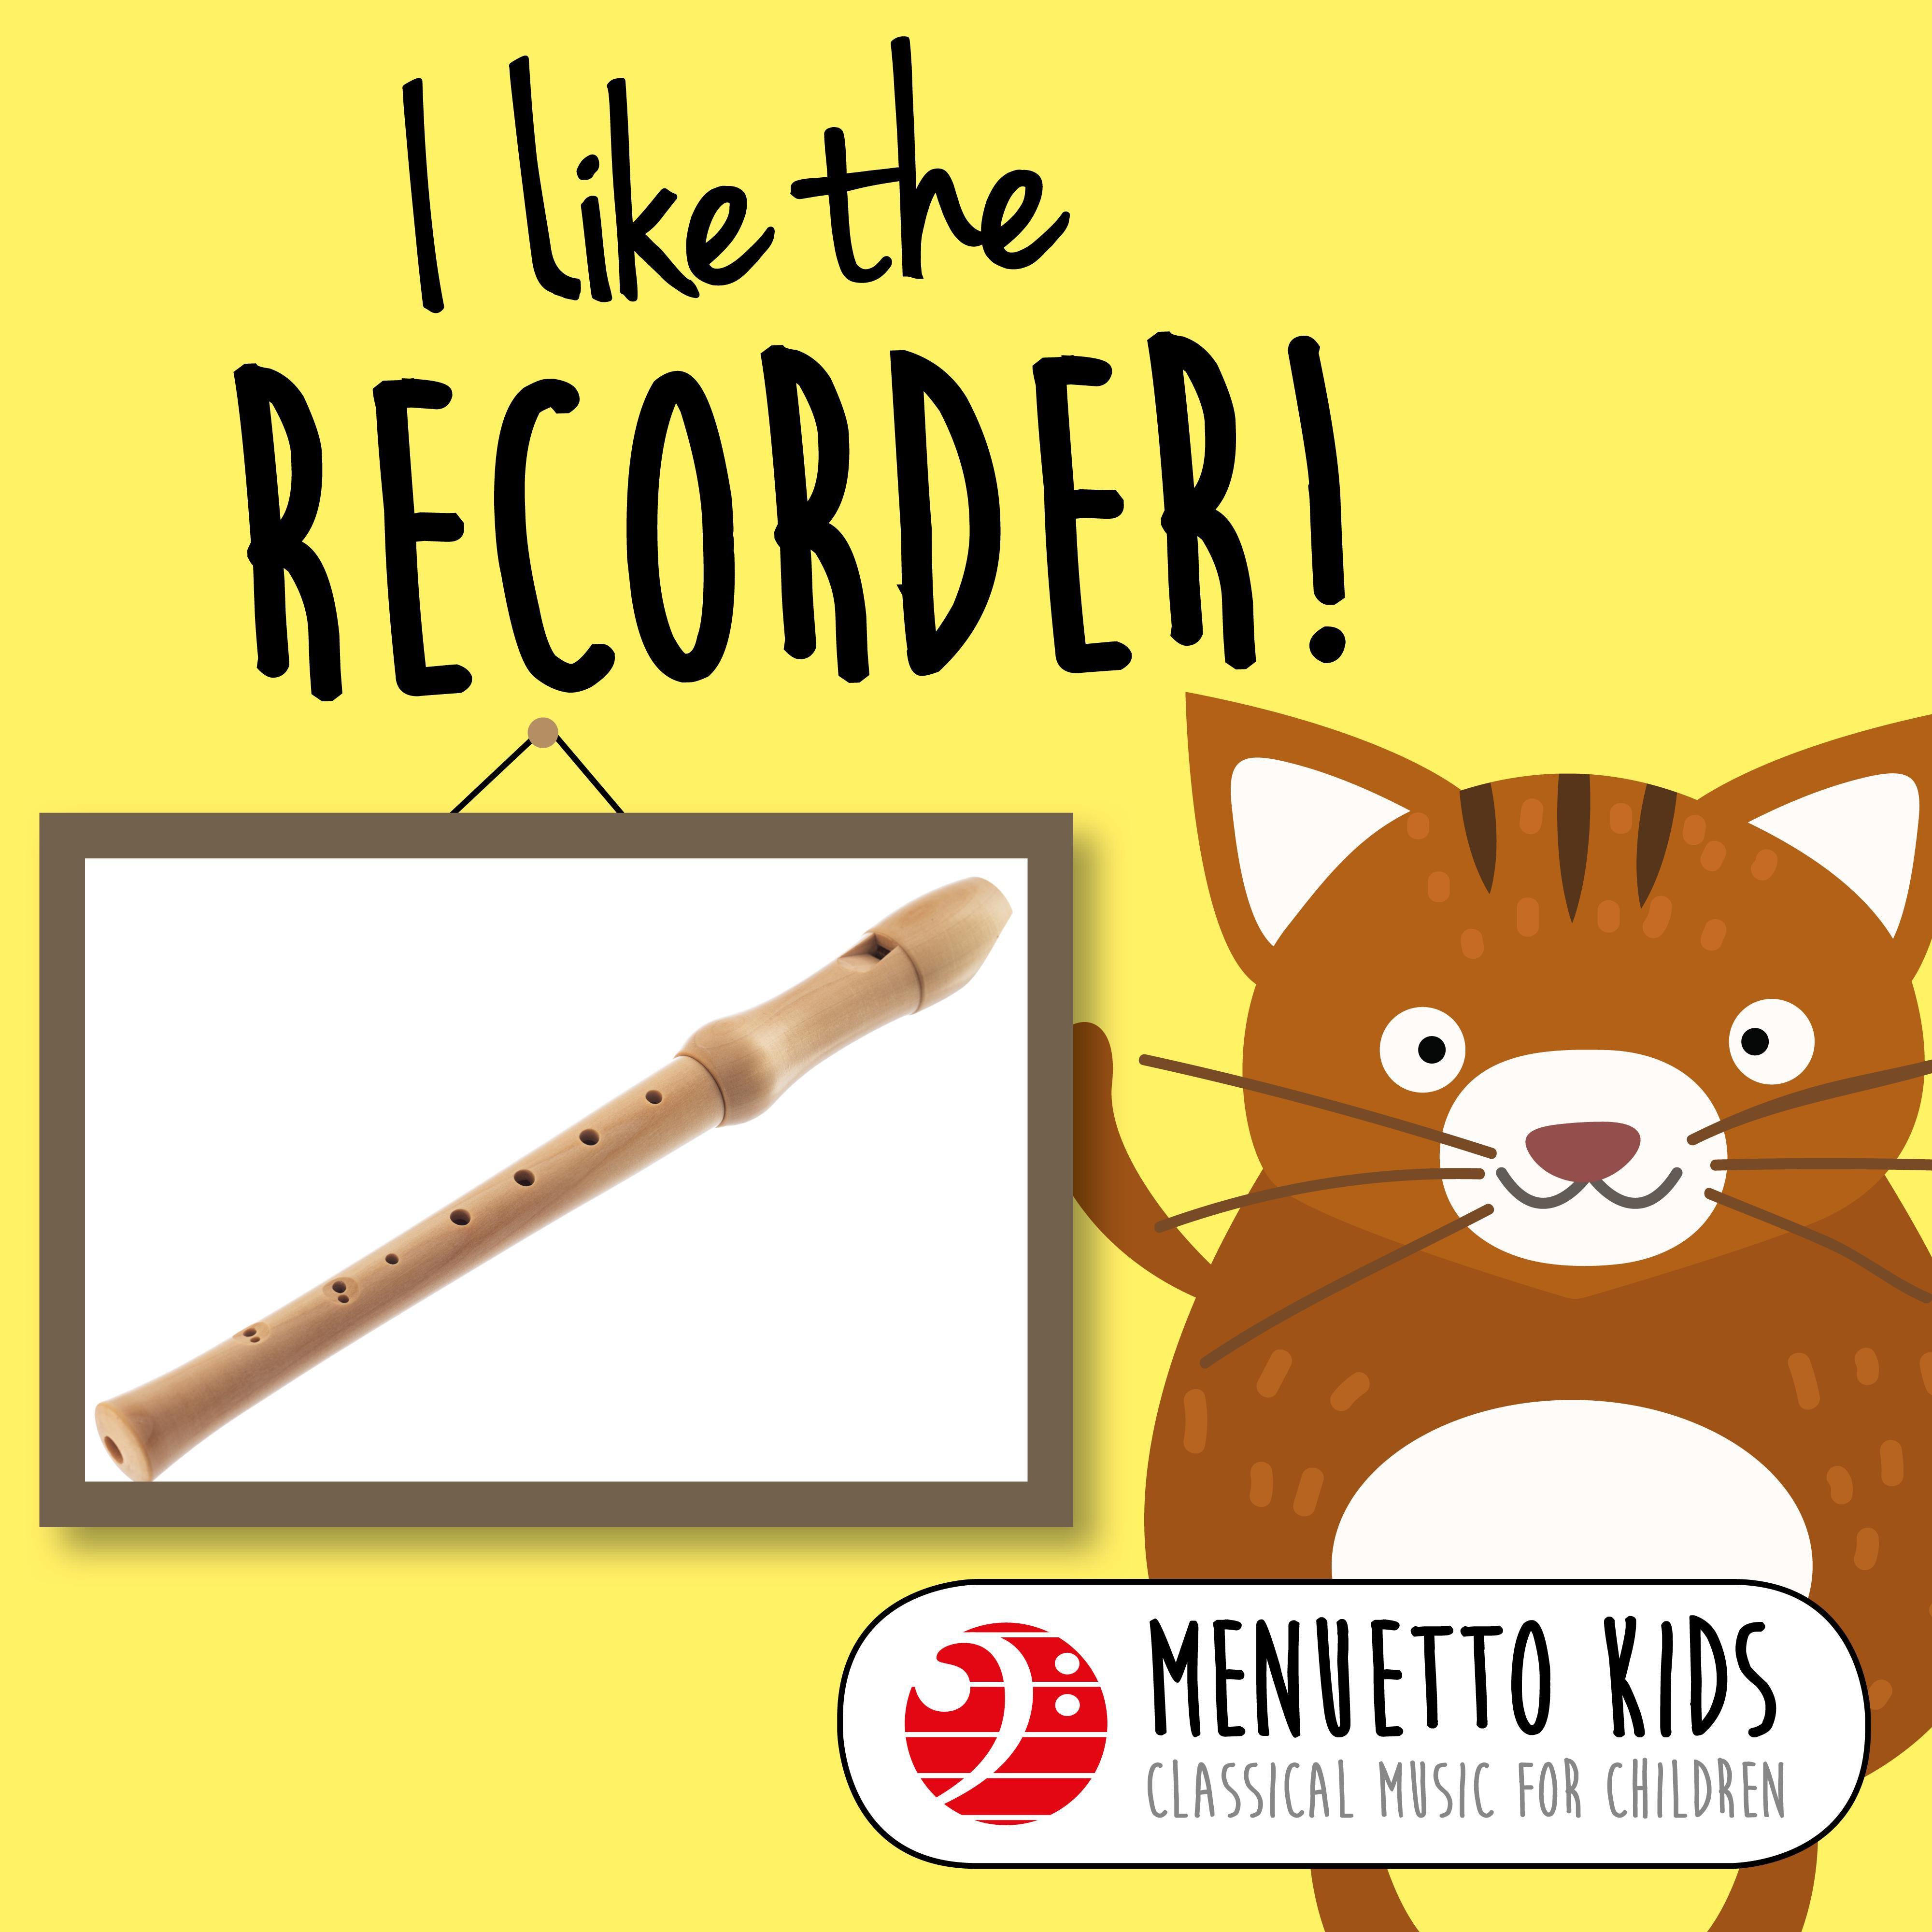 I Like the Recorder! (Menuetto Kids - Classical Music for Children)